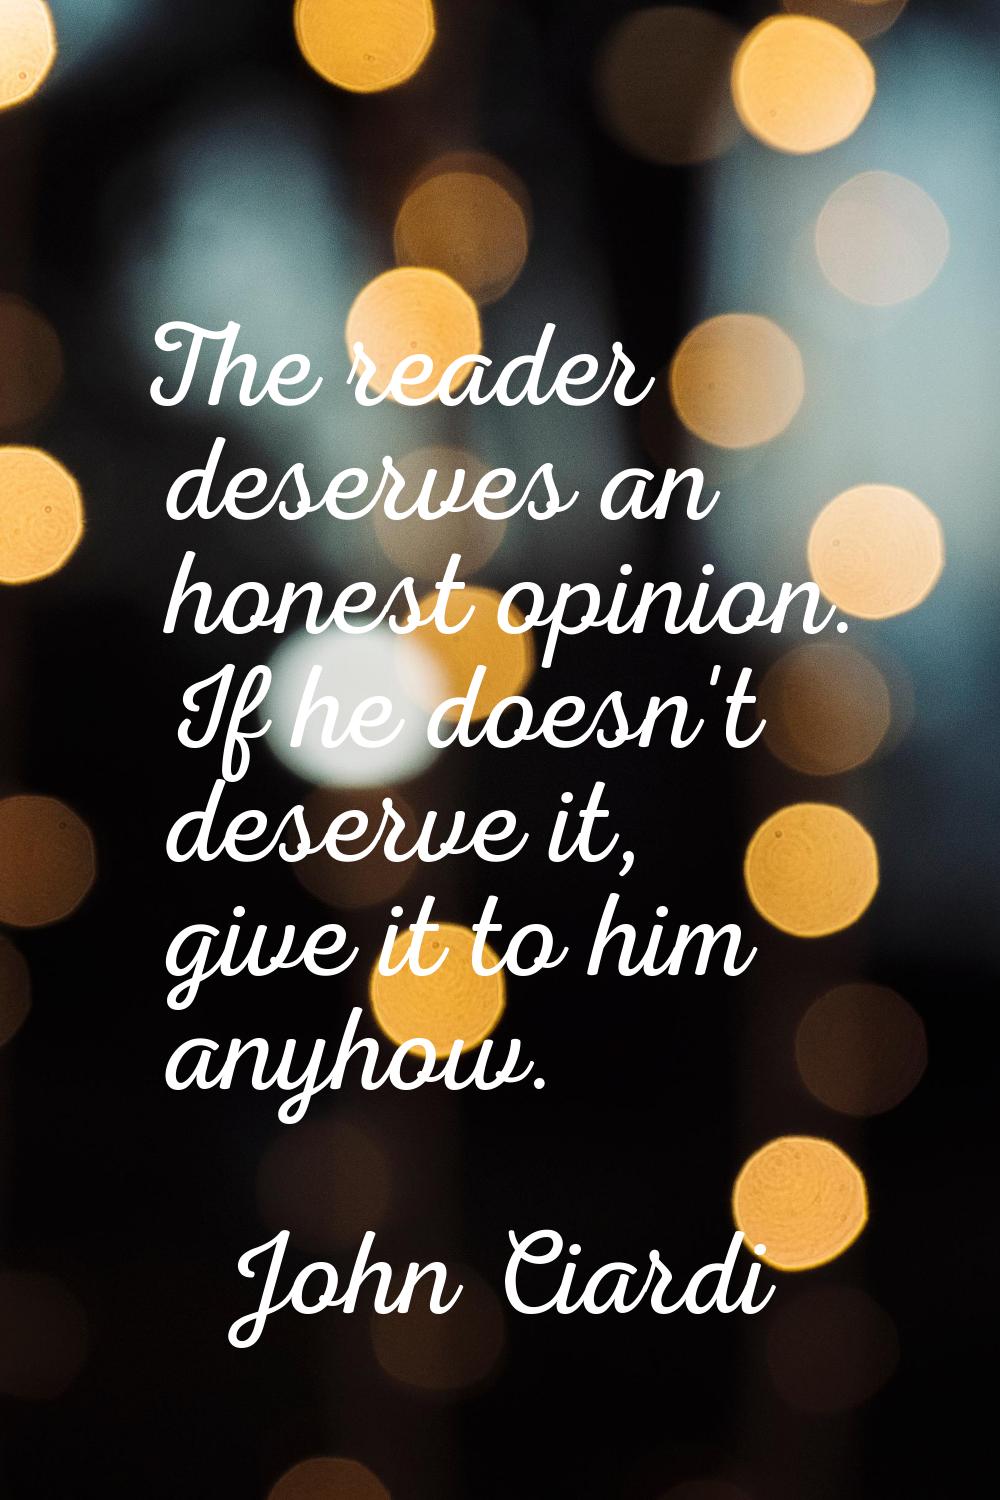 The reader deserves an honest opinion. If he doesn't deserve it, give it to him anyhow.